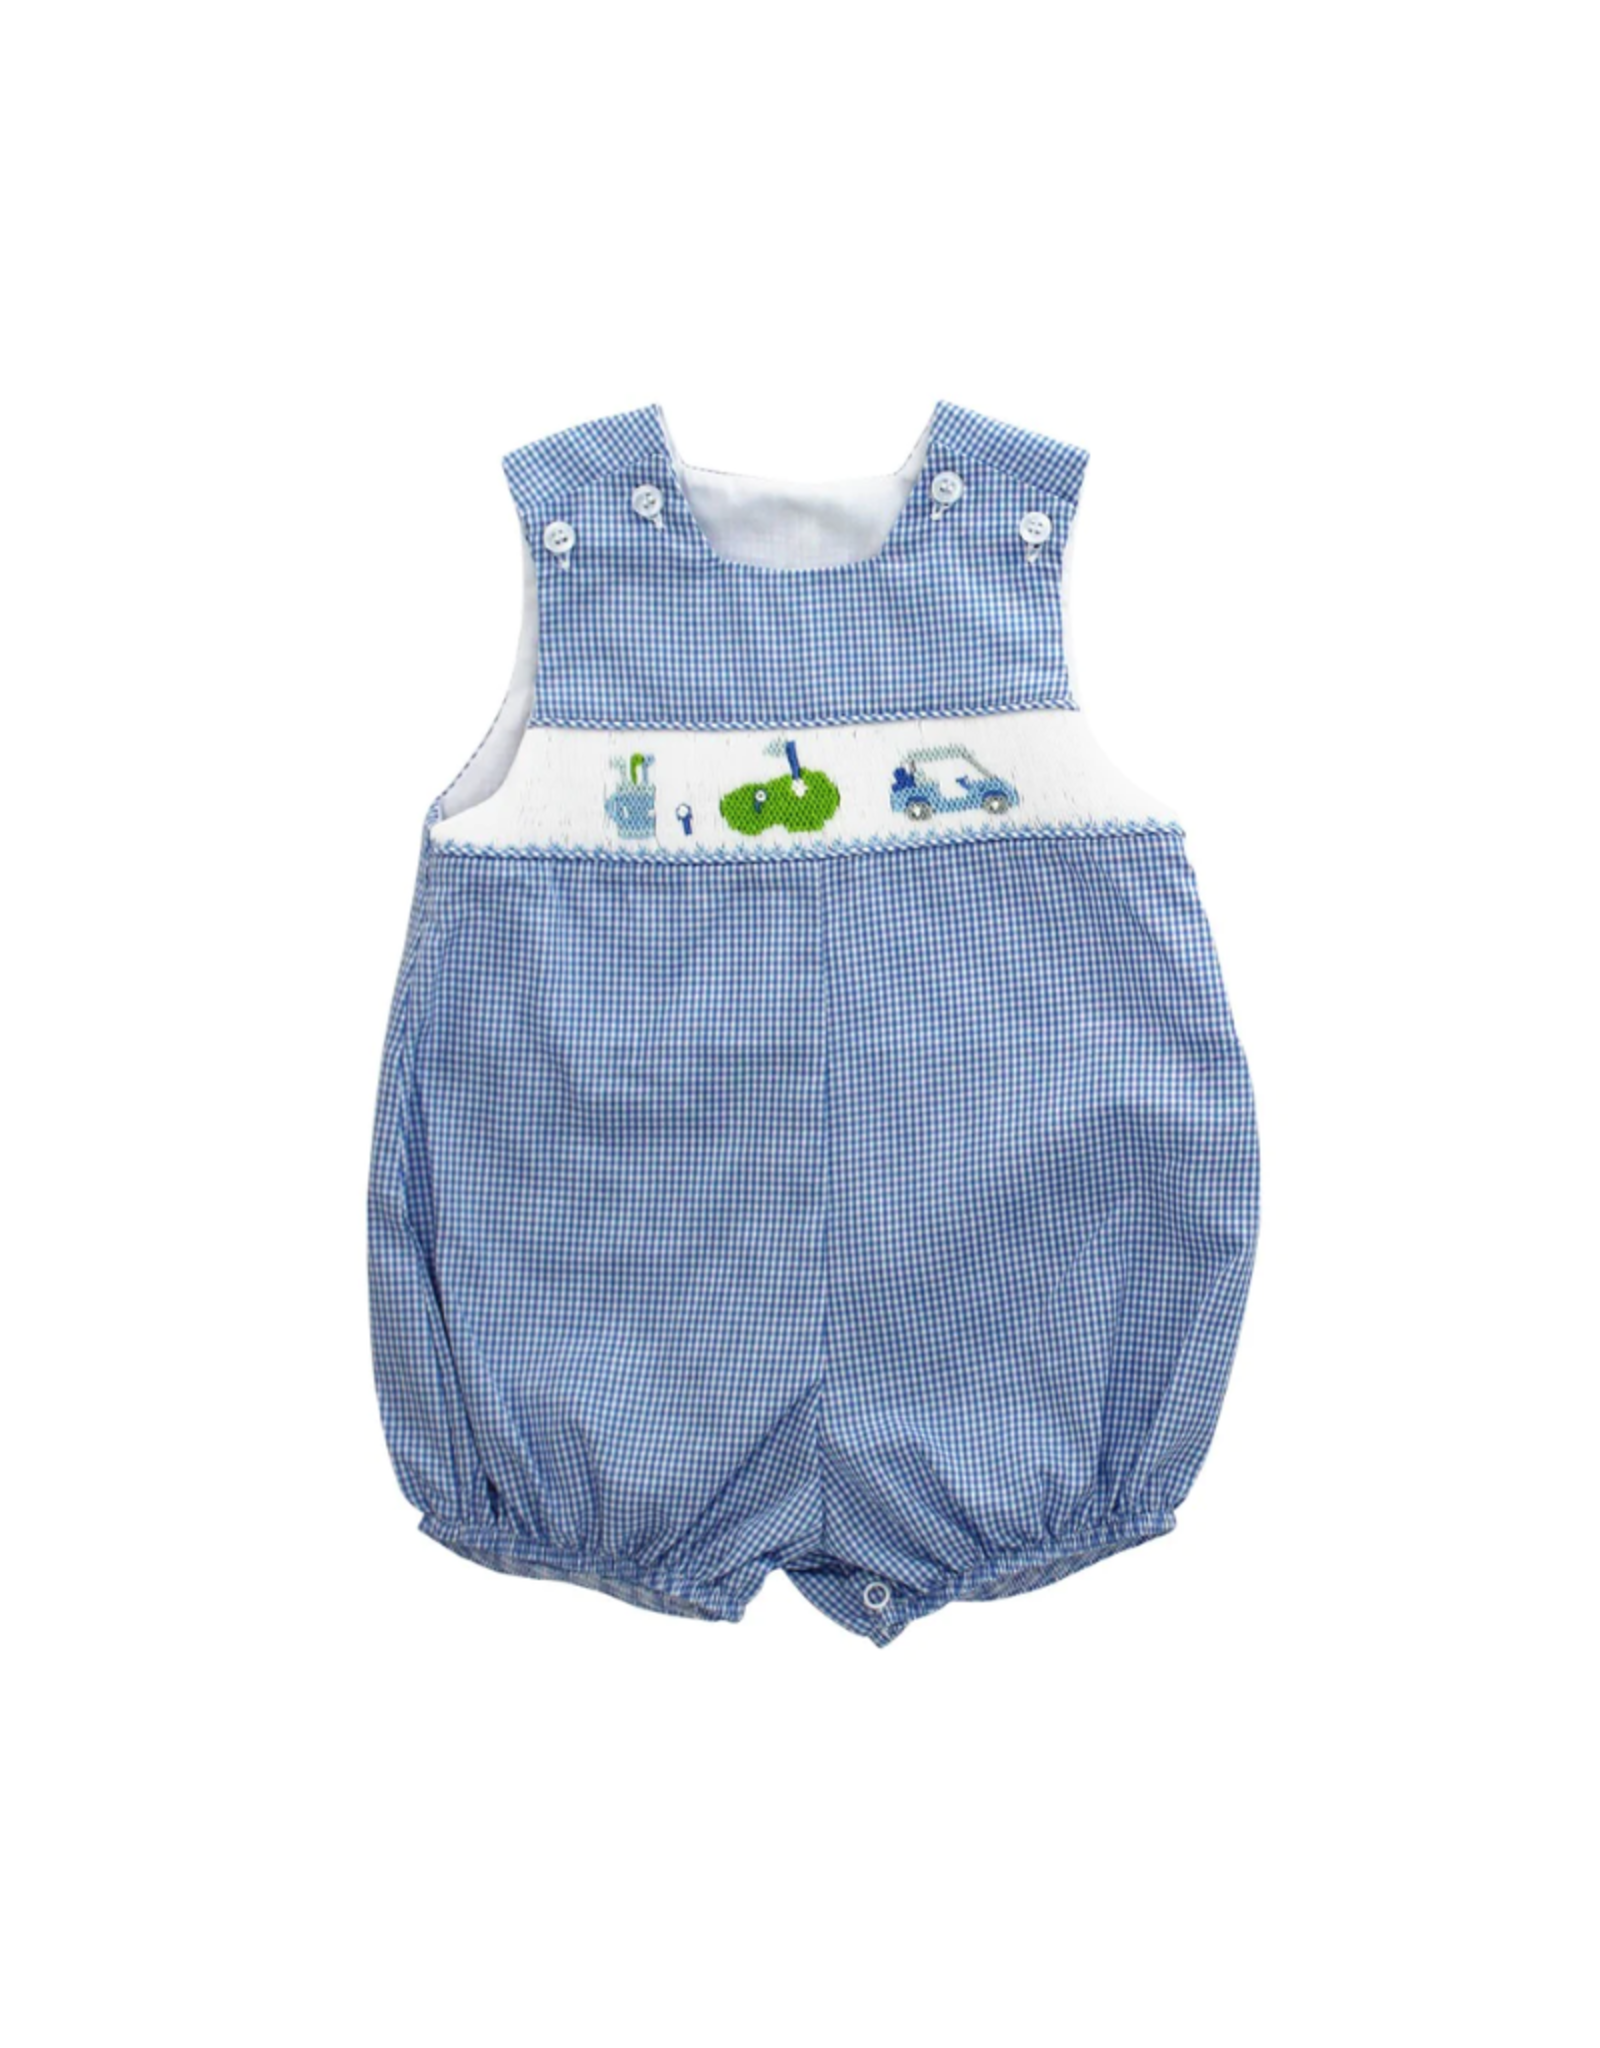 The Bailey Boys Blue Gingham Tee Time Smocked Bubble